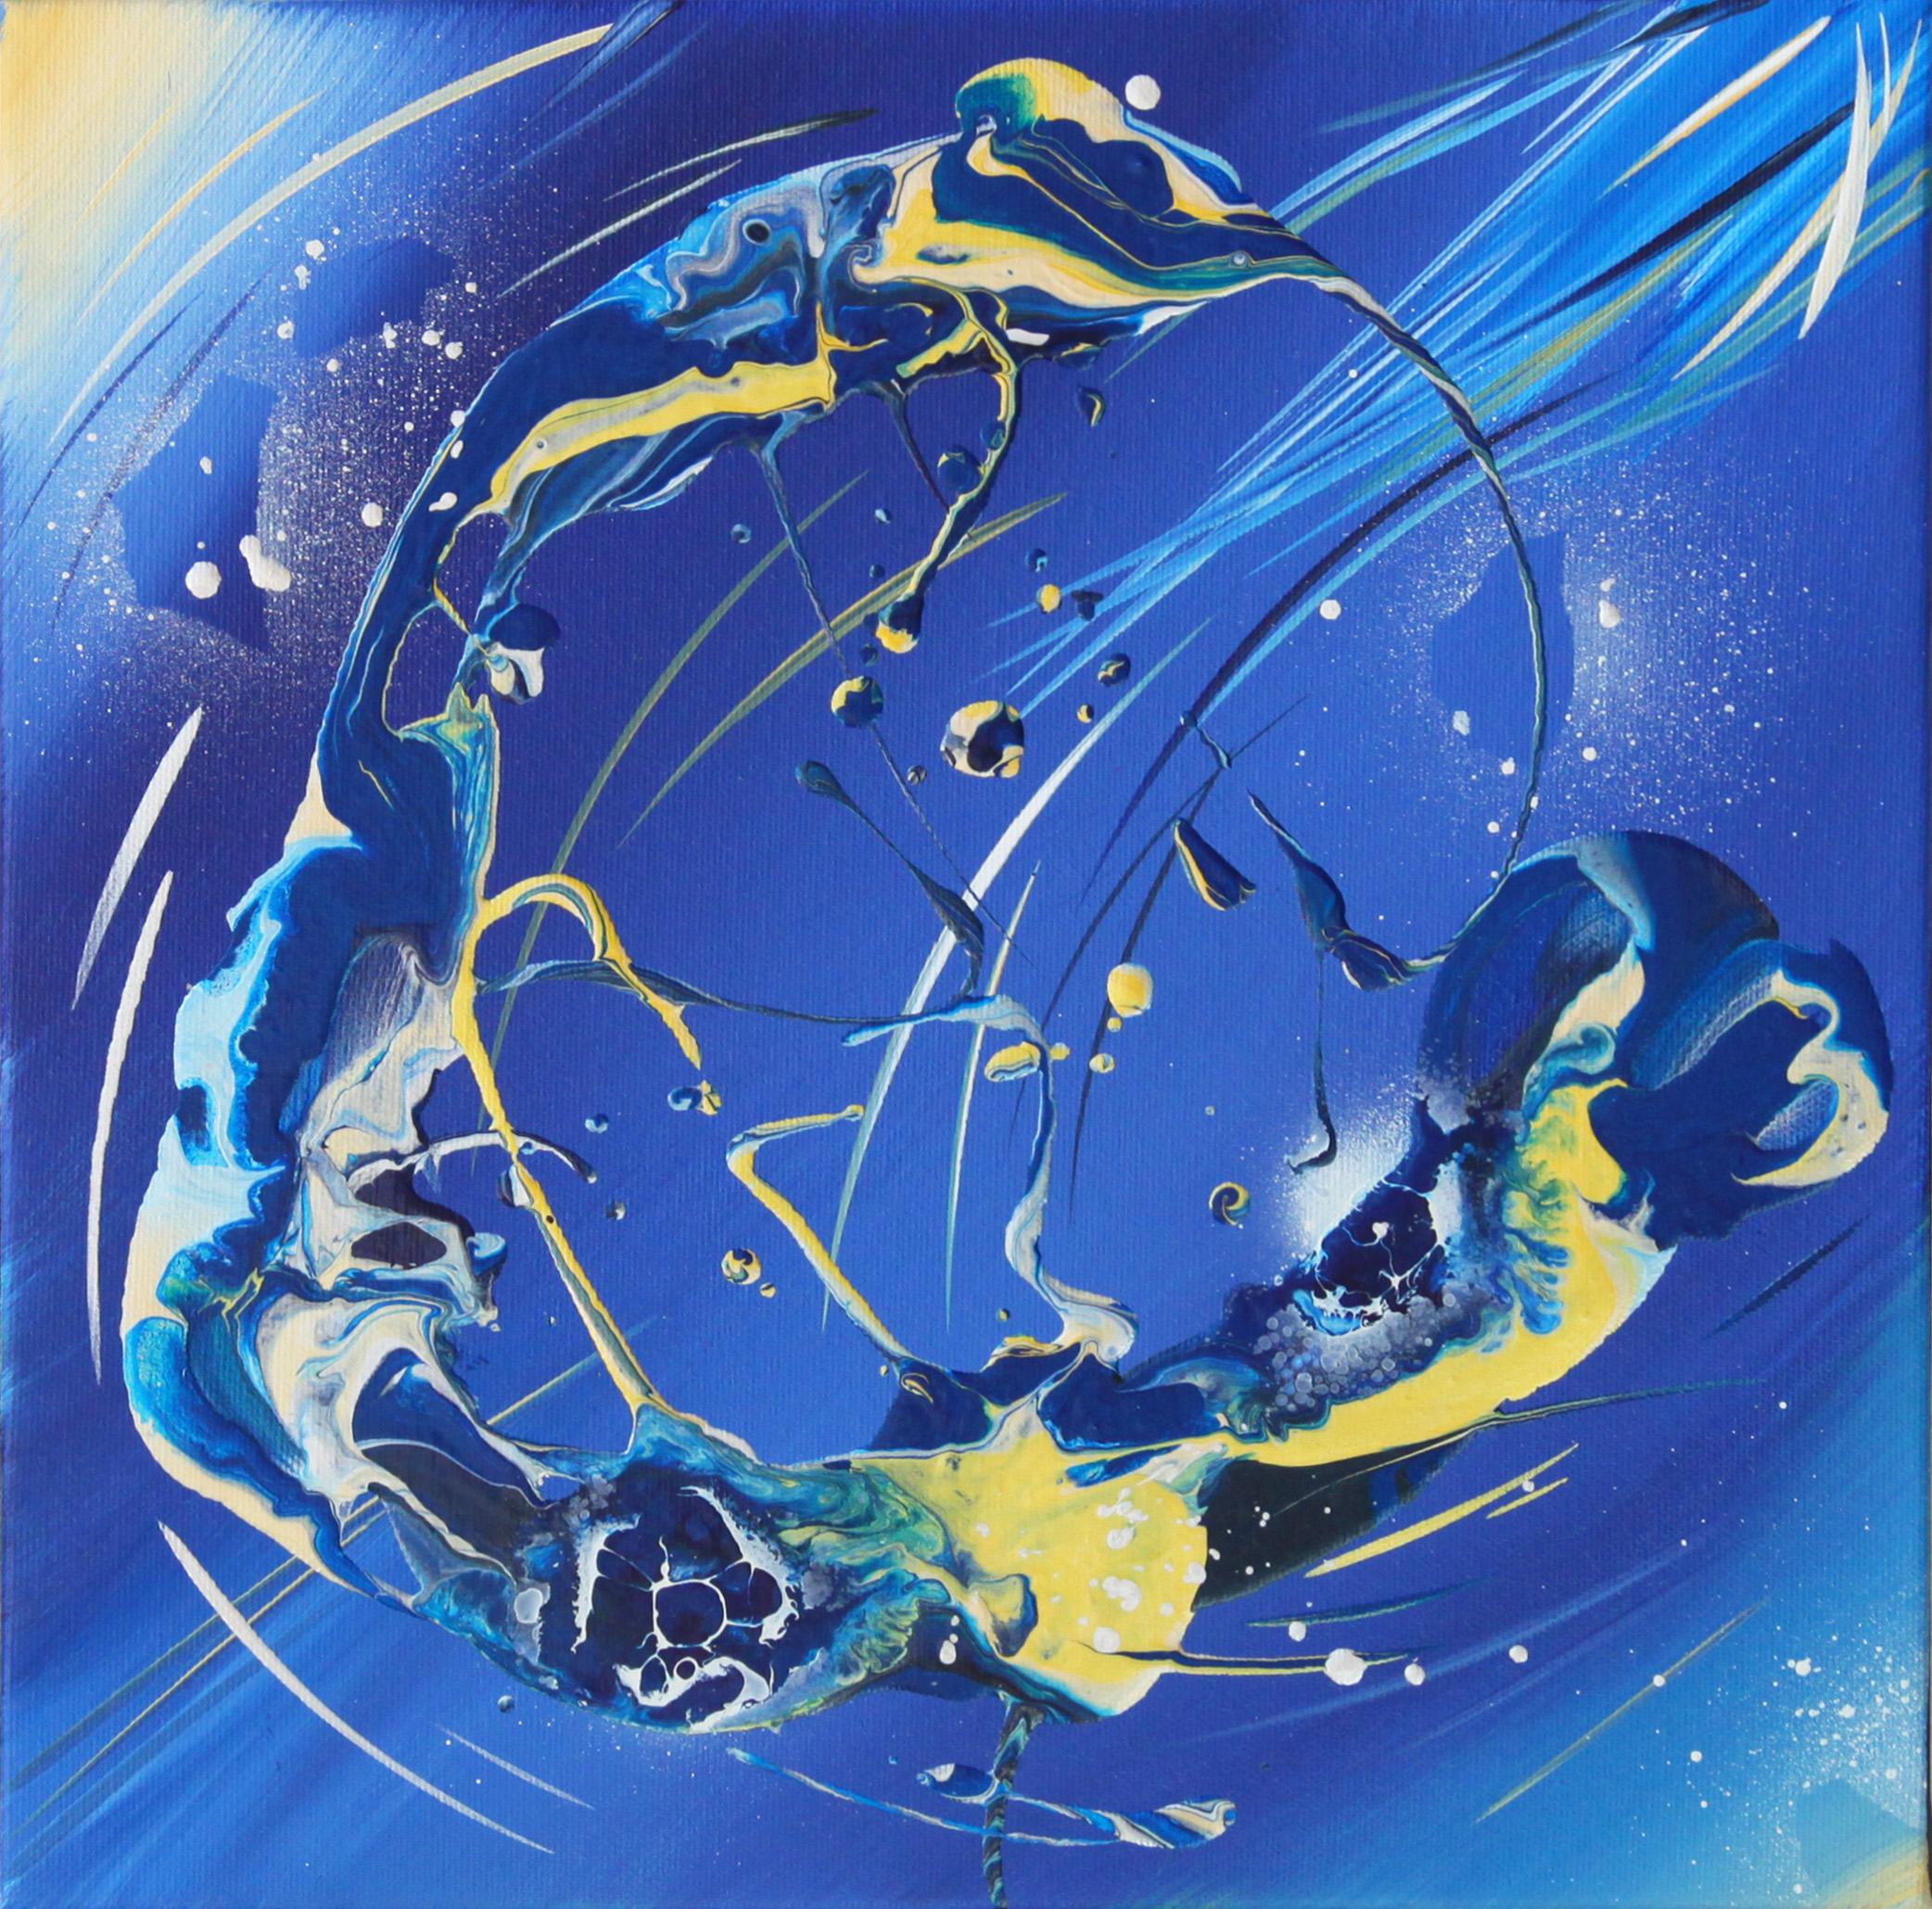 Abstract Painting Michael Carini - Peinture expressionniste abstraite « Van Gogh's Shooting Stars 7 »